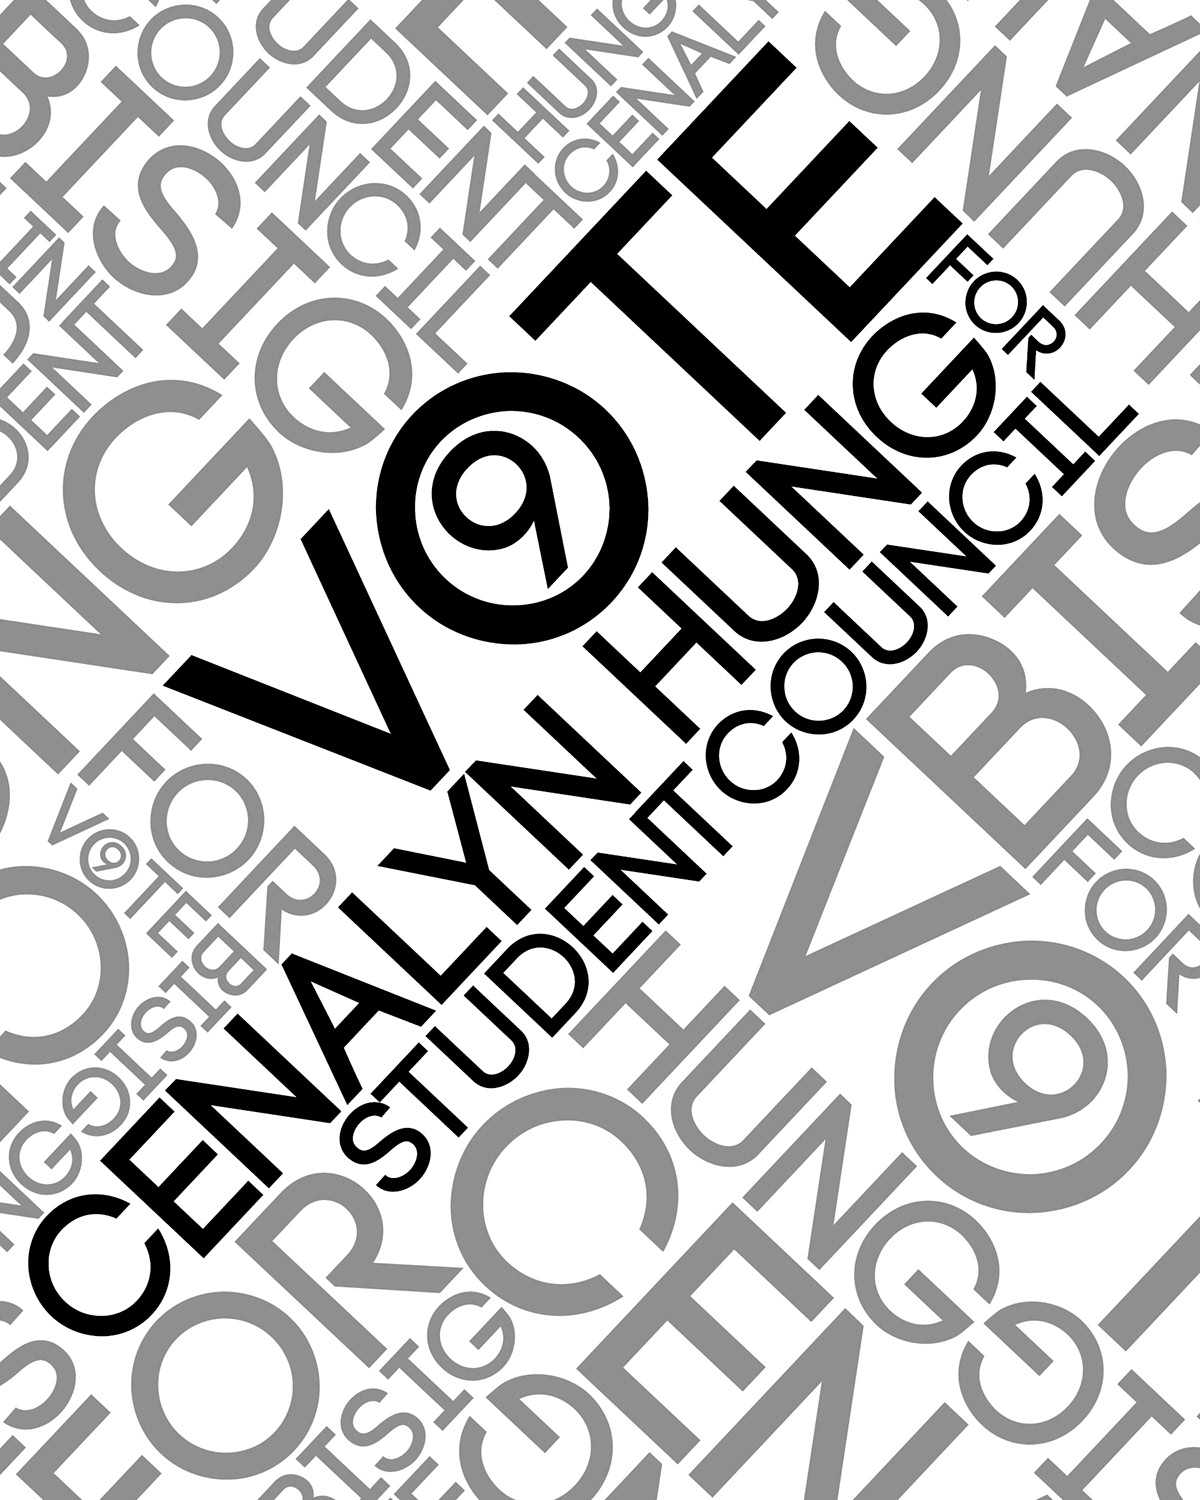 Elections highschool high school student council posters vote design